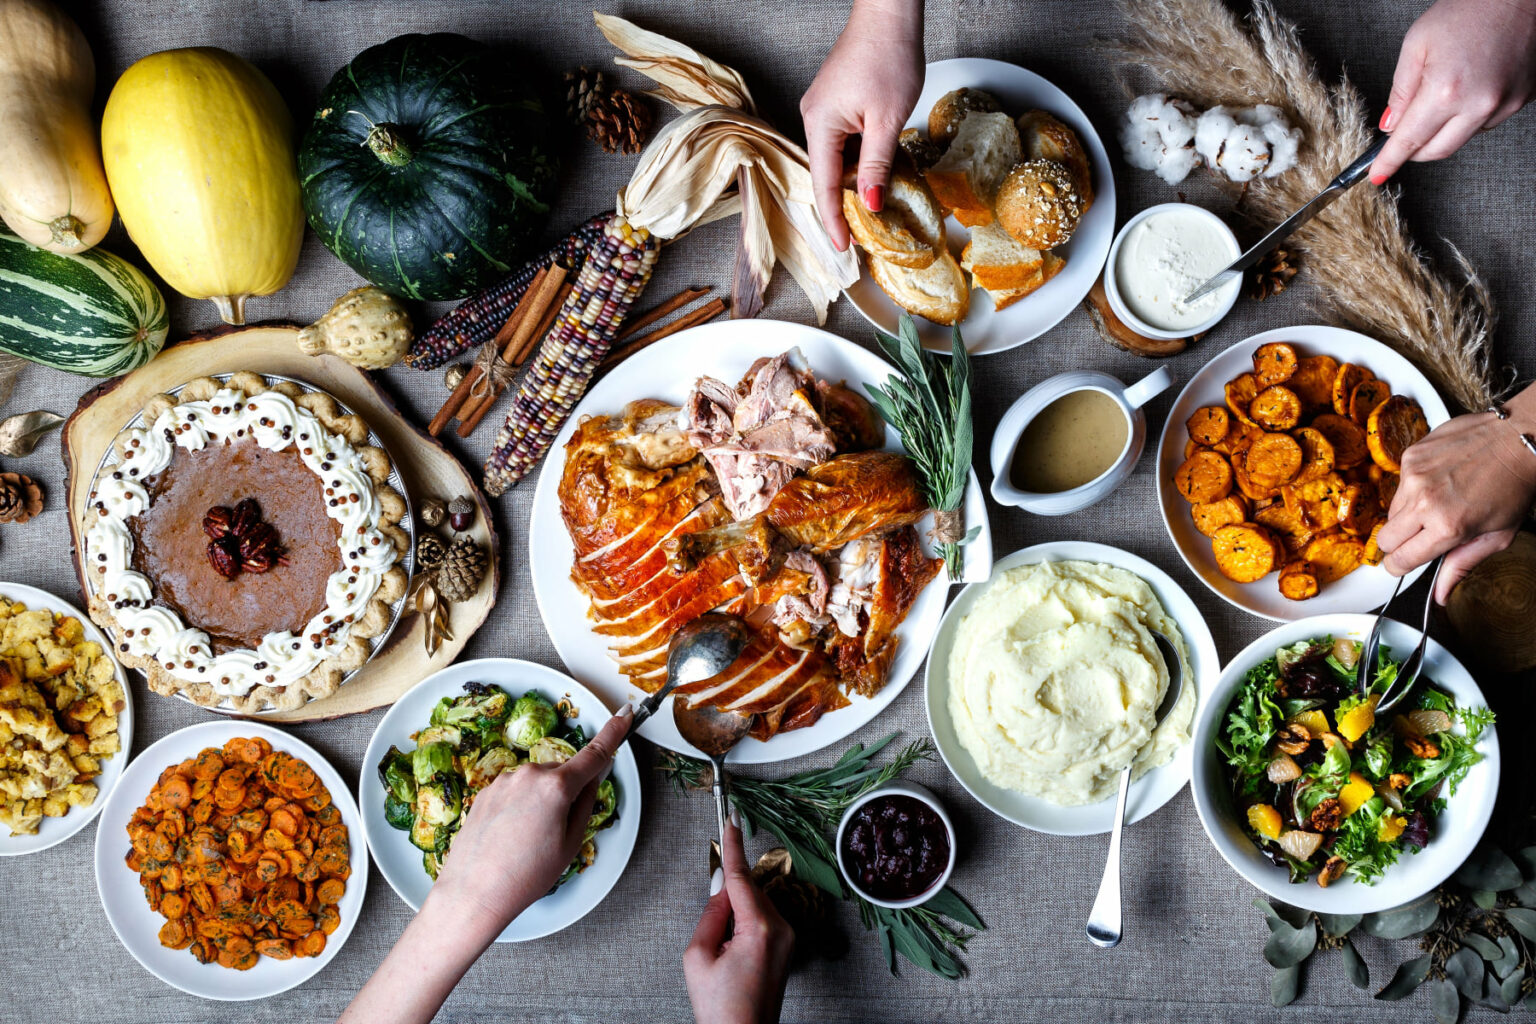 Vancouver Restaurants Serving Thanksgiving Dinner and Meal Kits ...